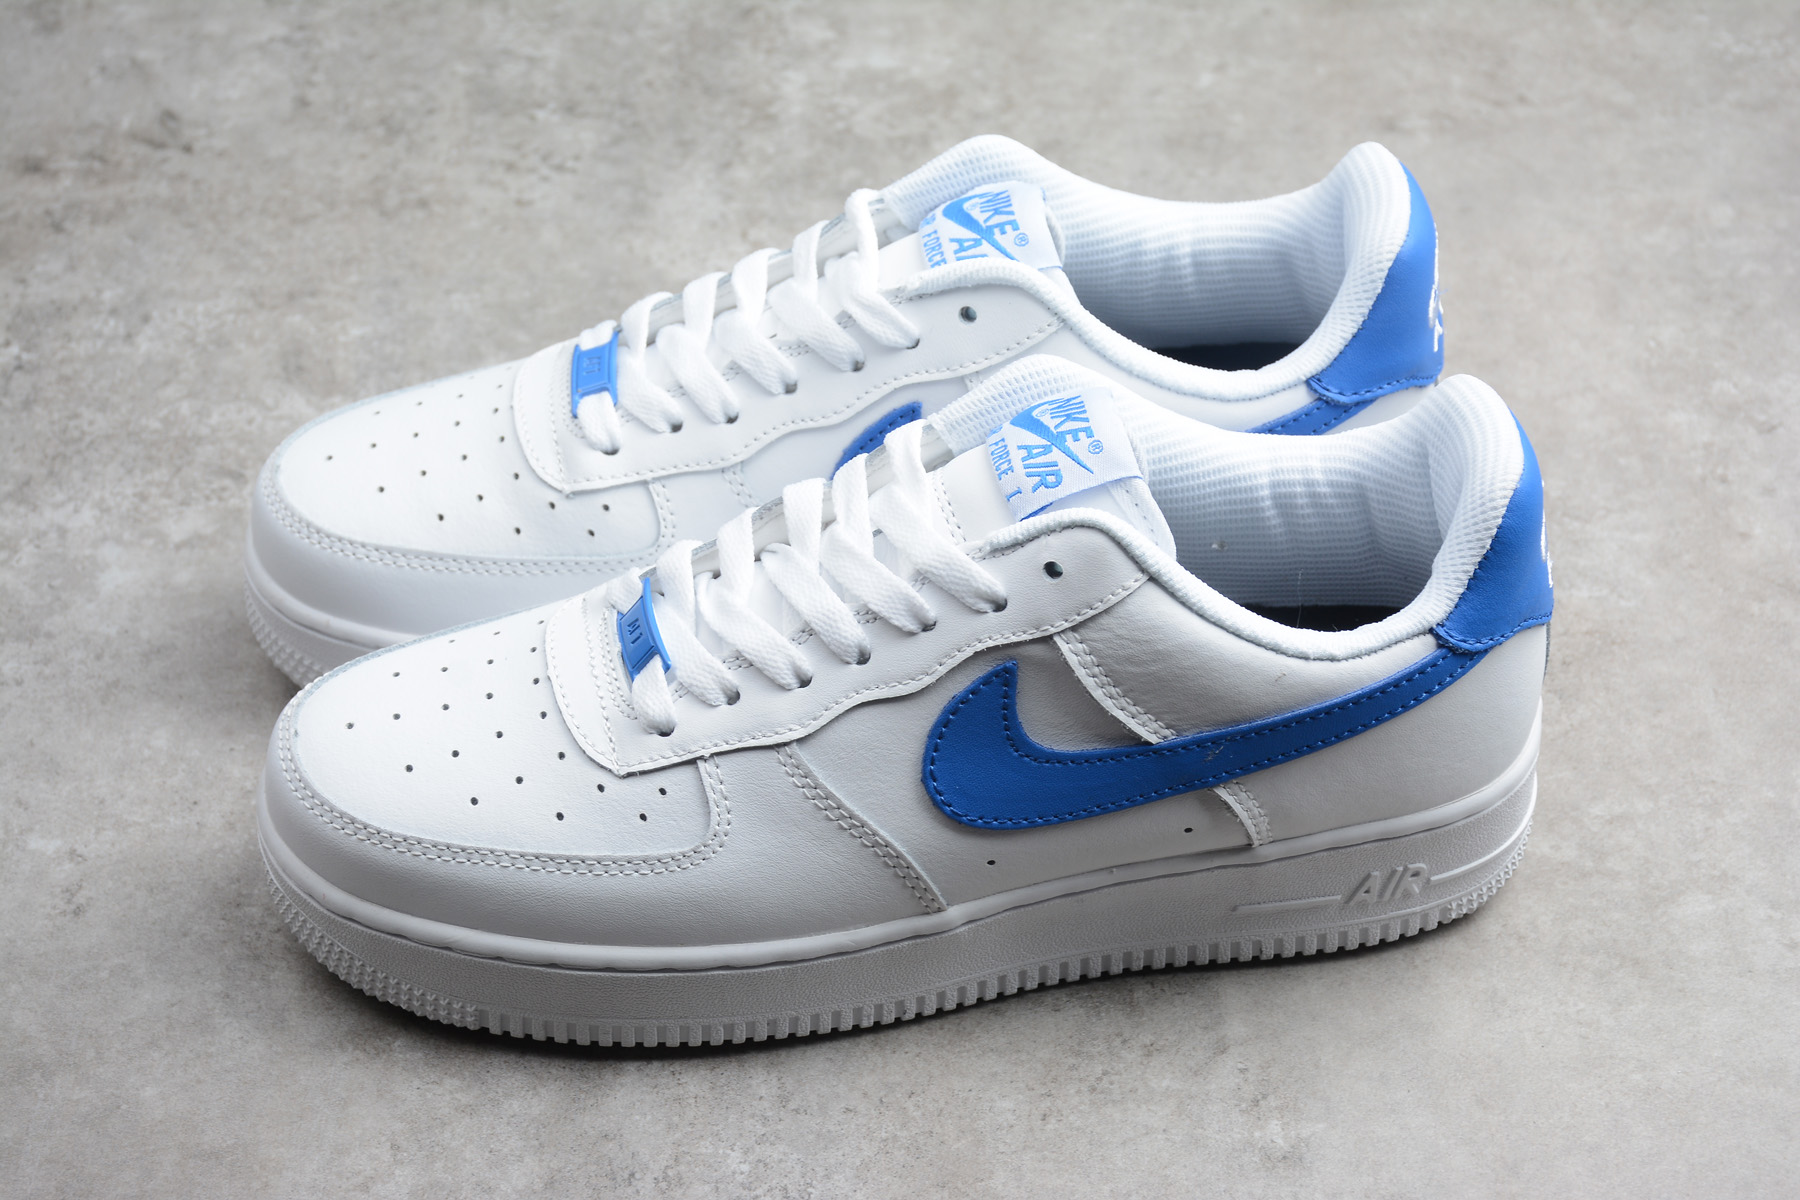 royal blue and white air force 1